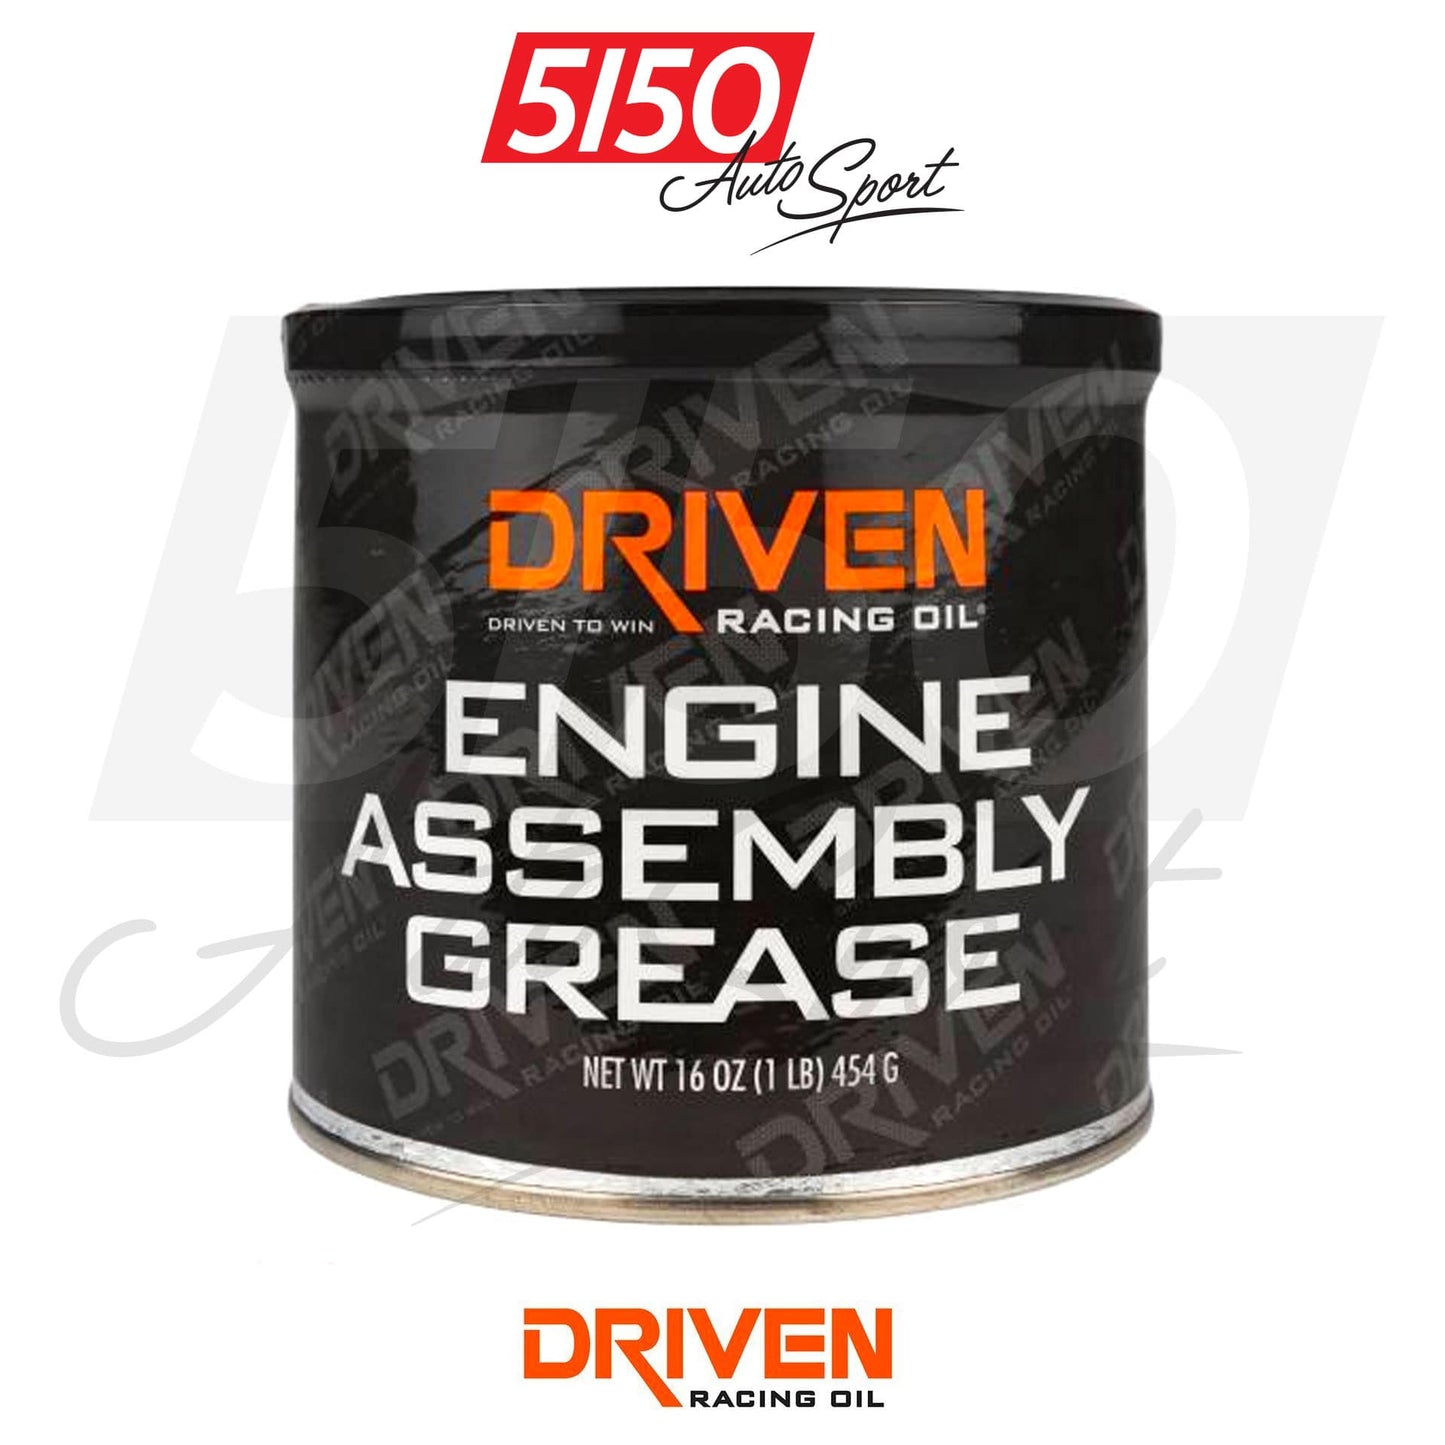 Driven Racing Oil Engine Assembly Grease (1 LB Tub)